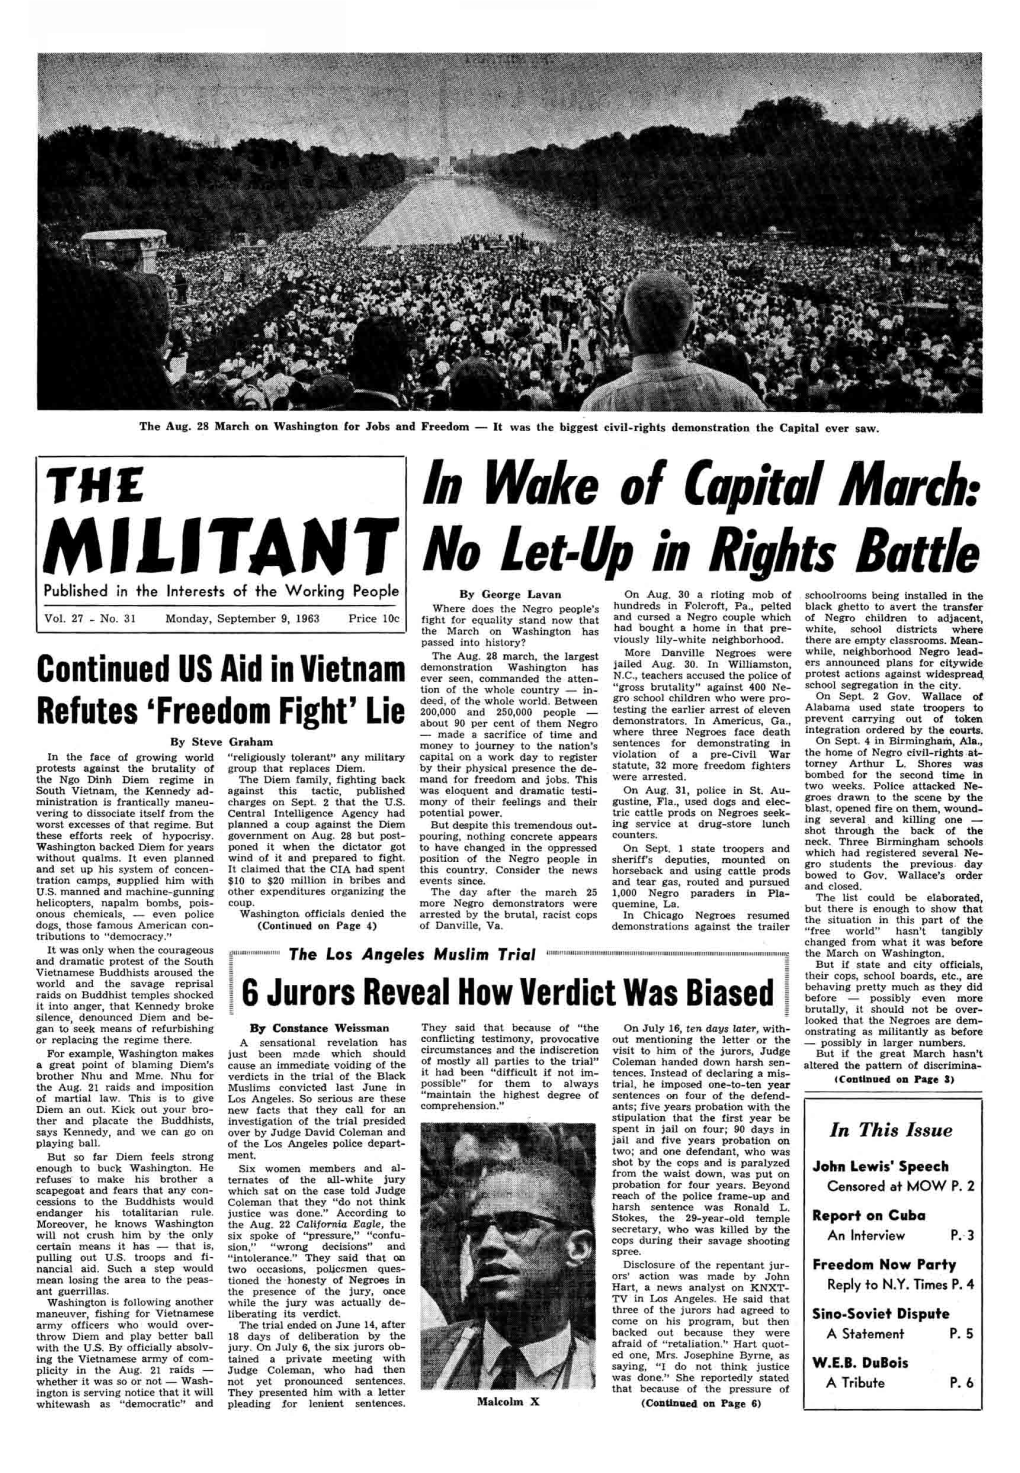 THE MILITANT Monday, September 9, 1963 Why Speech Speech That SNCC Leader the NATIONAL PICKET LINEL of John Lewis Had Planned for D.C